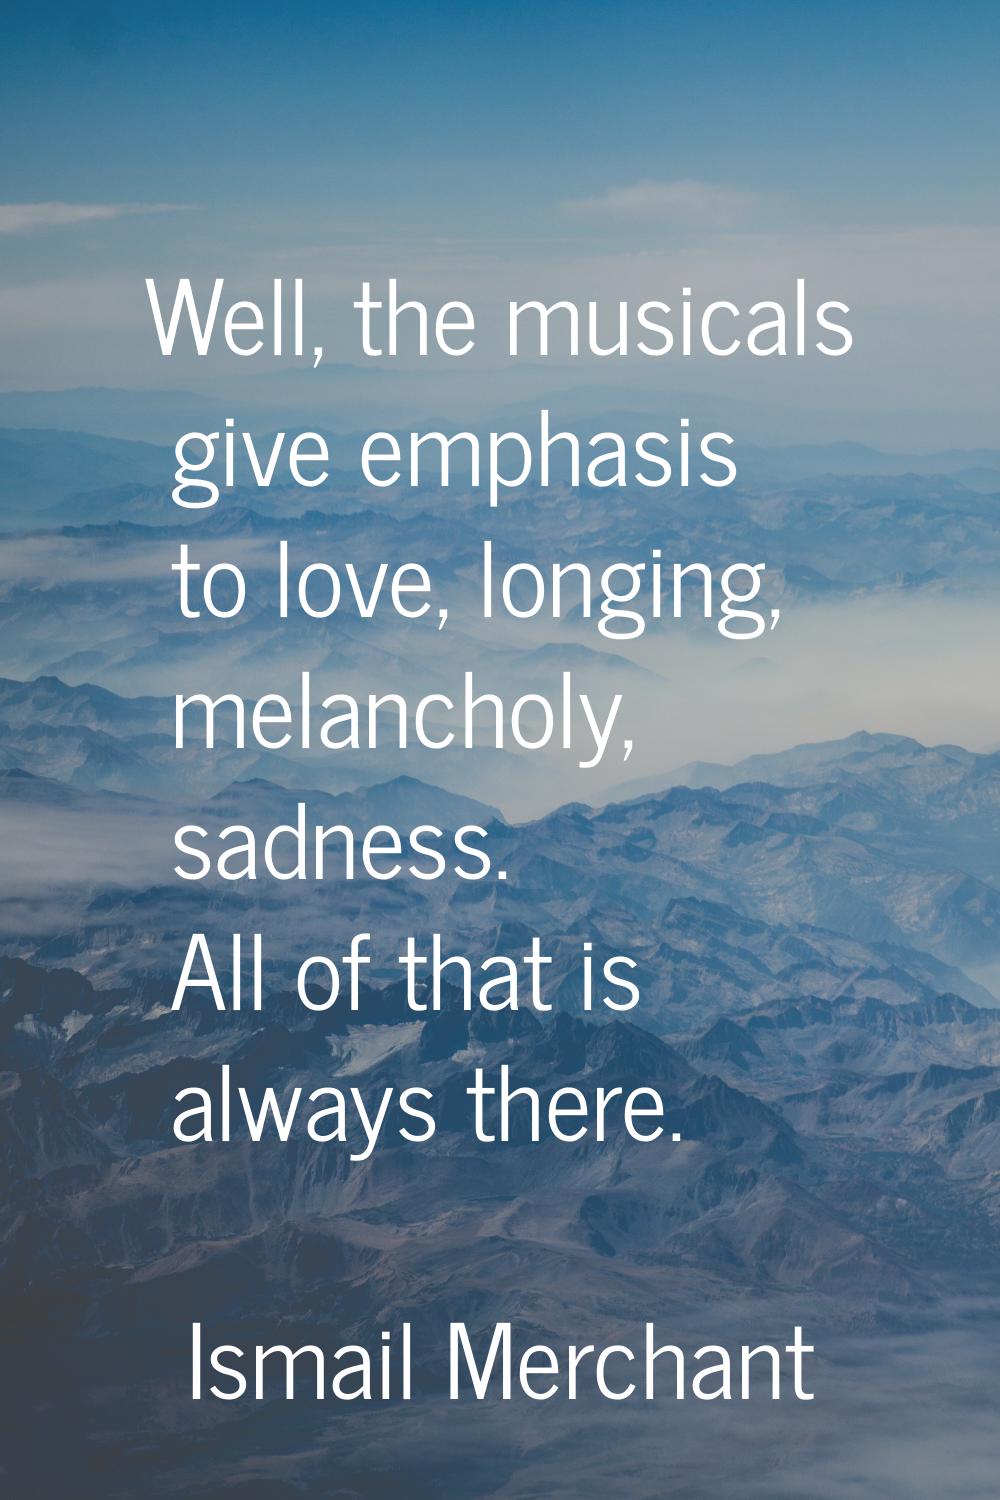 Well, the musicals give emphasis to love, longing, melancholy, sadness. All of that is always there